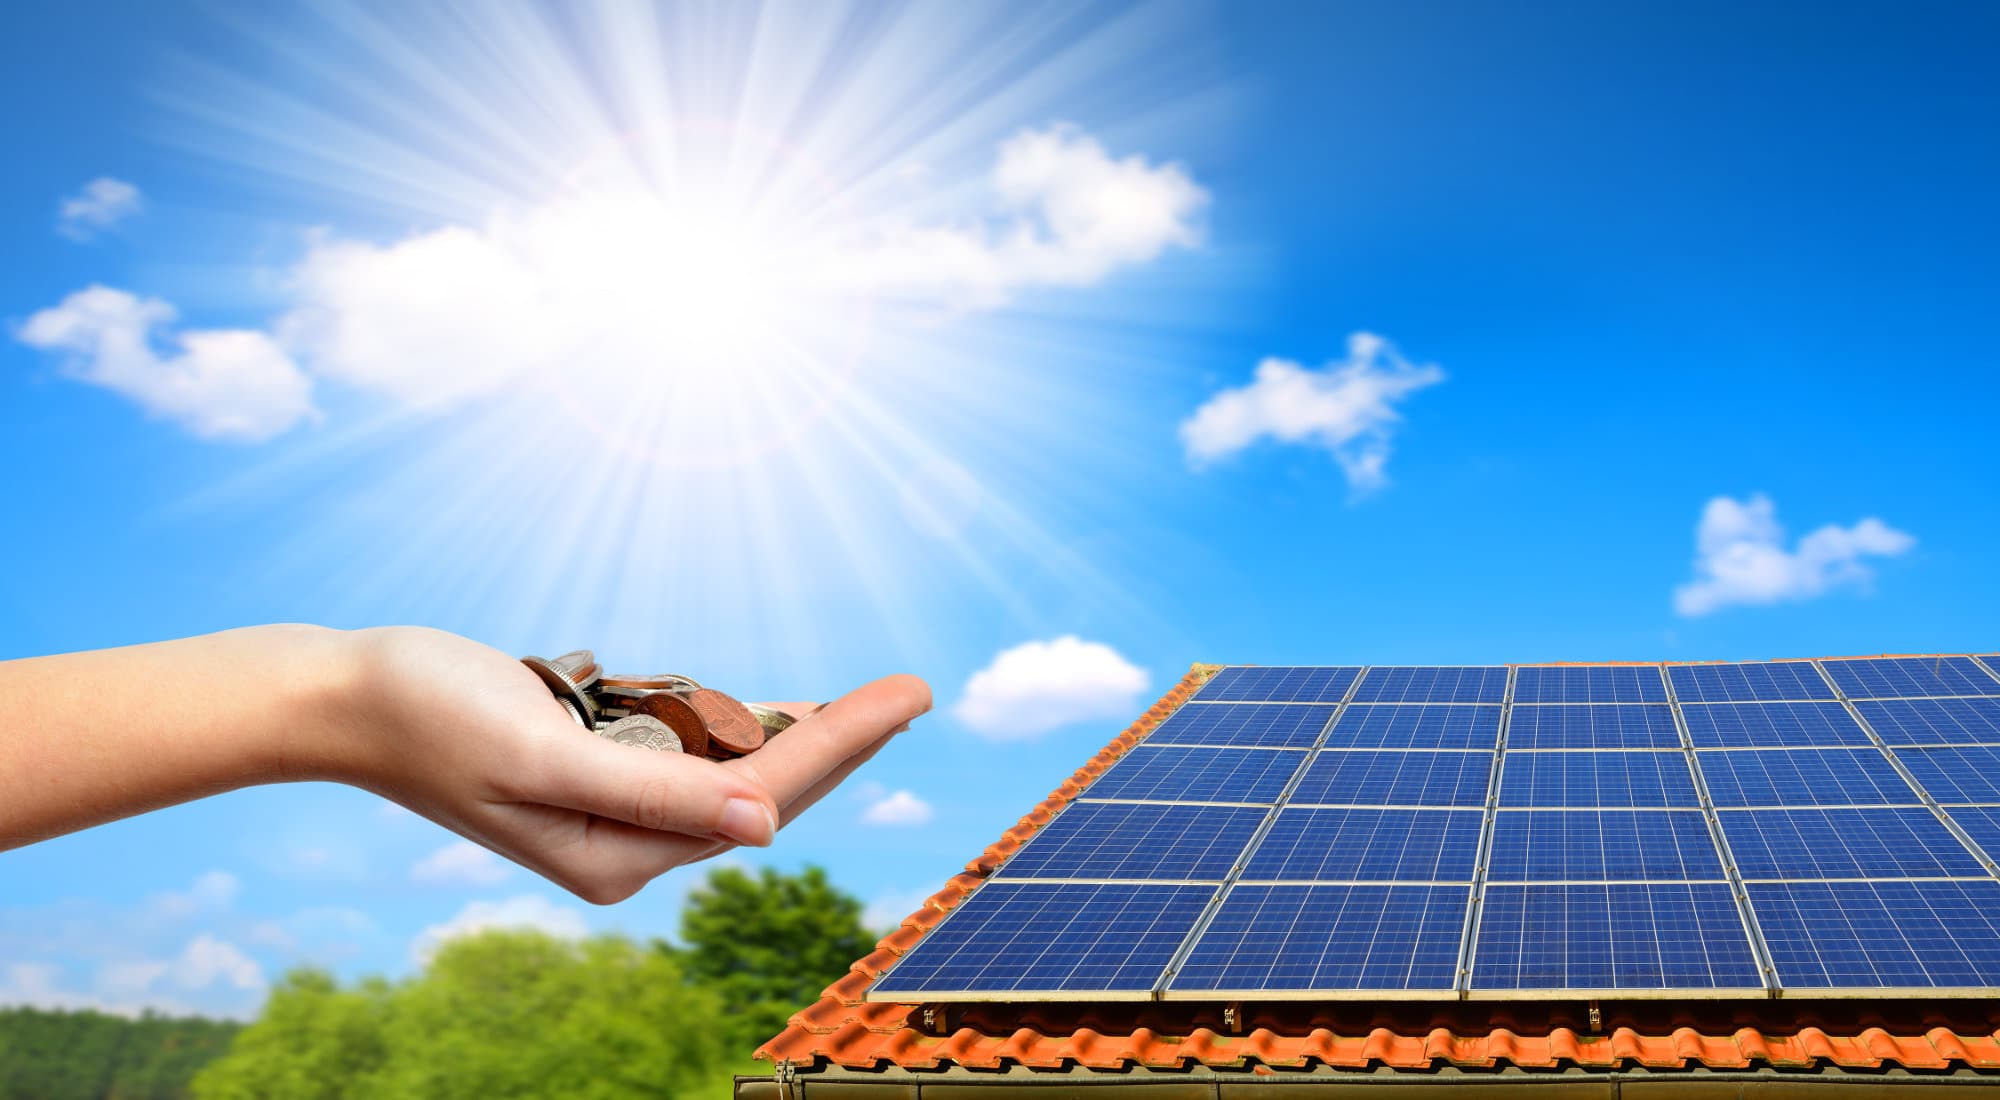 What Is A Federal Tax Credit For Energy Efficiency